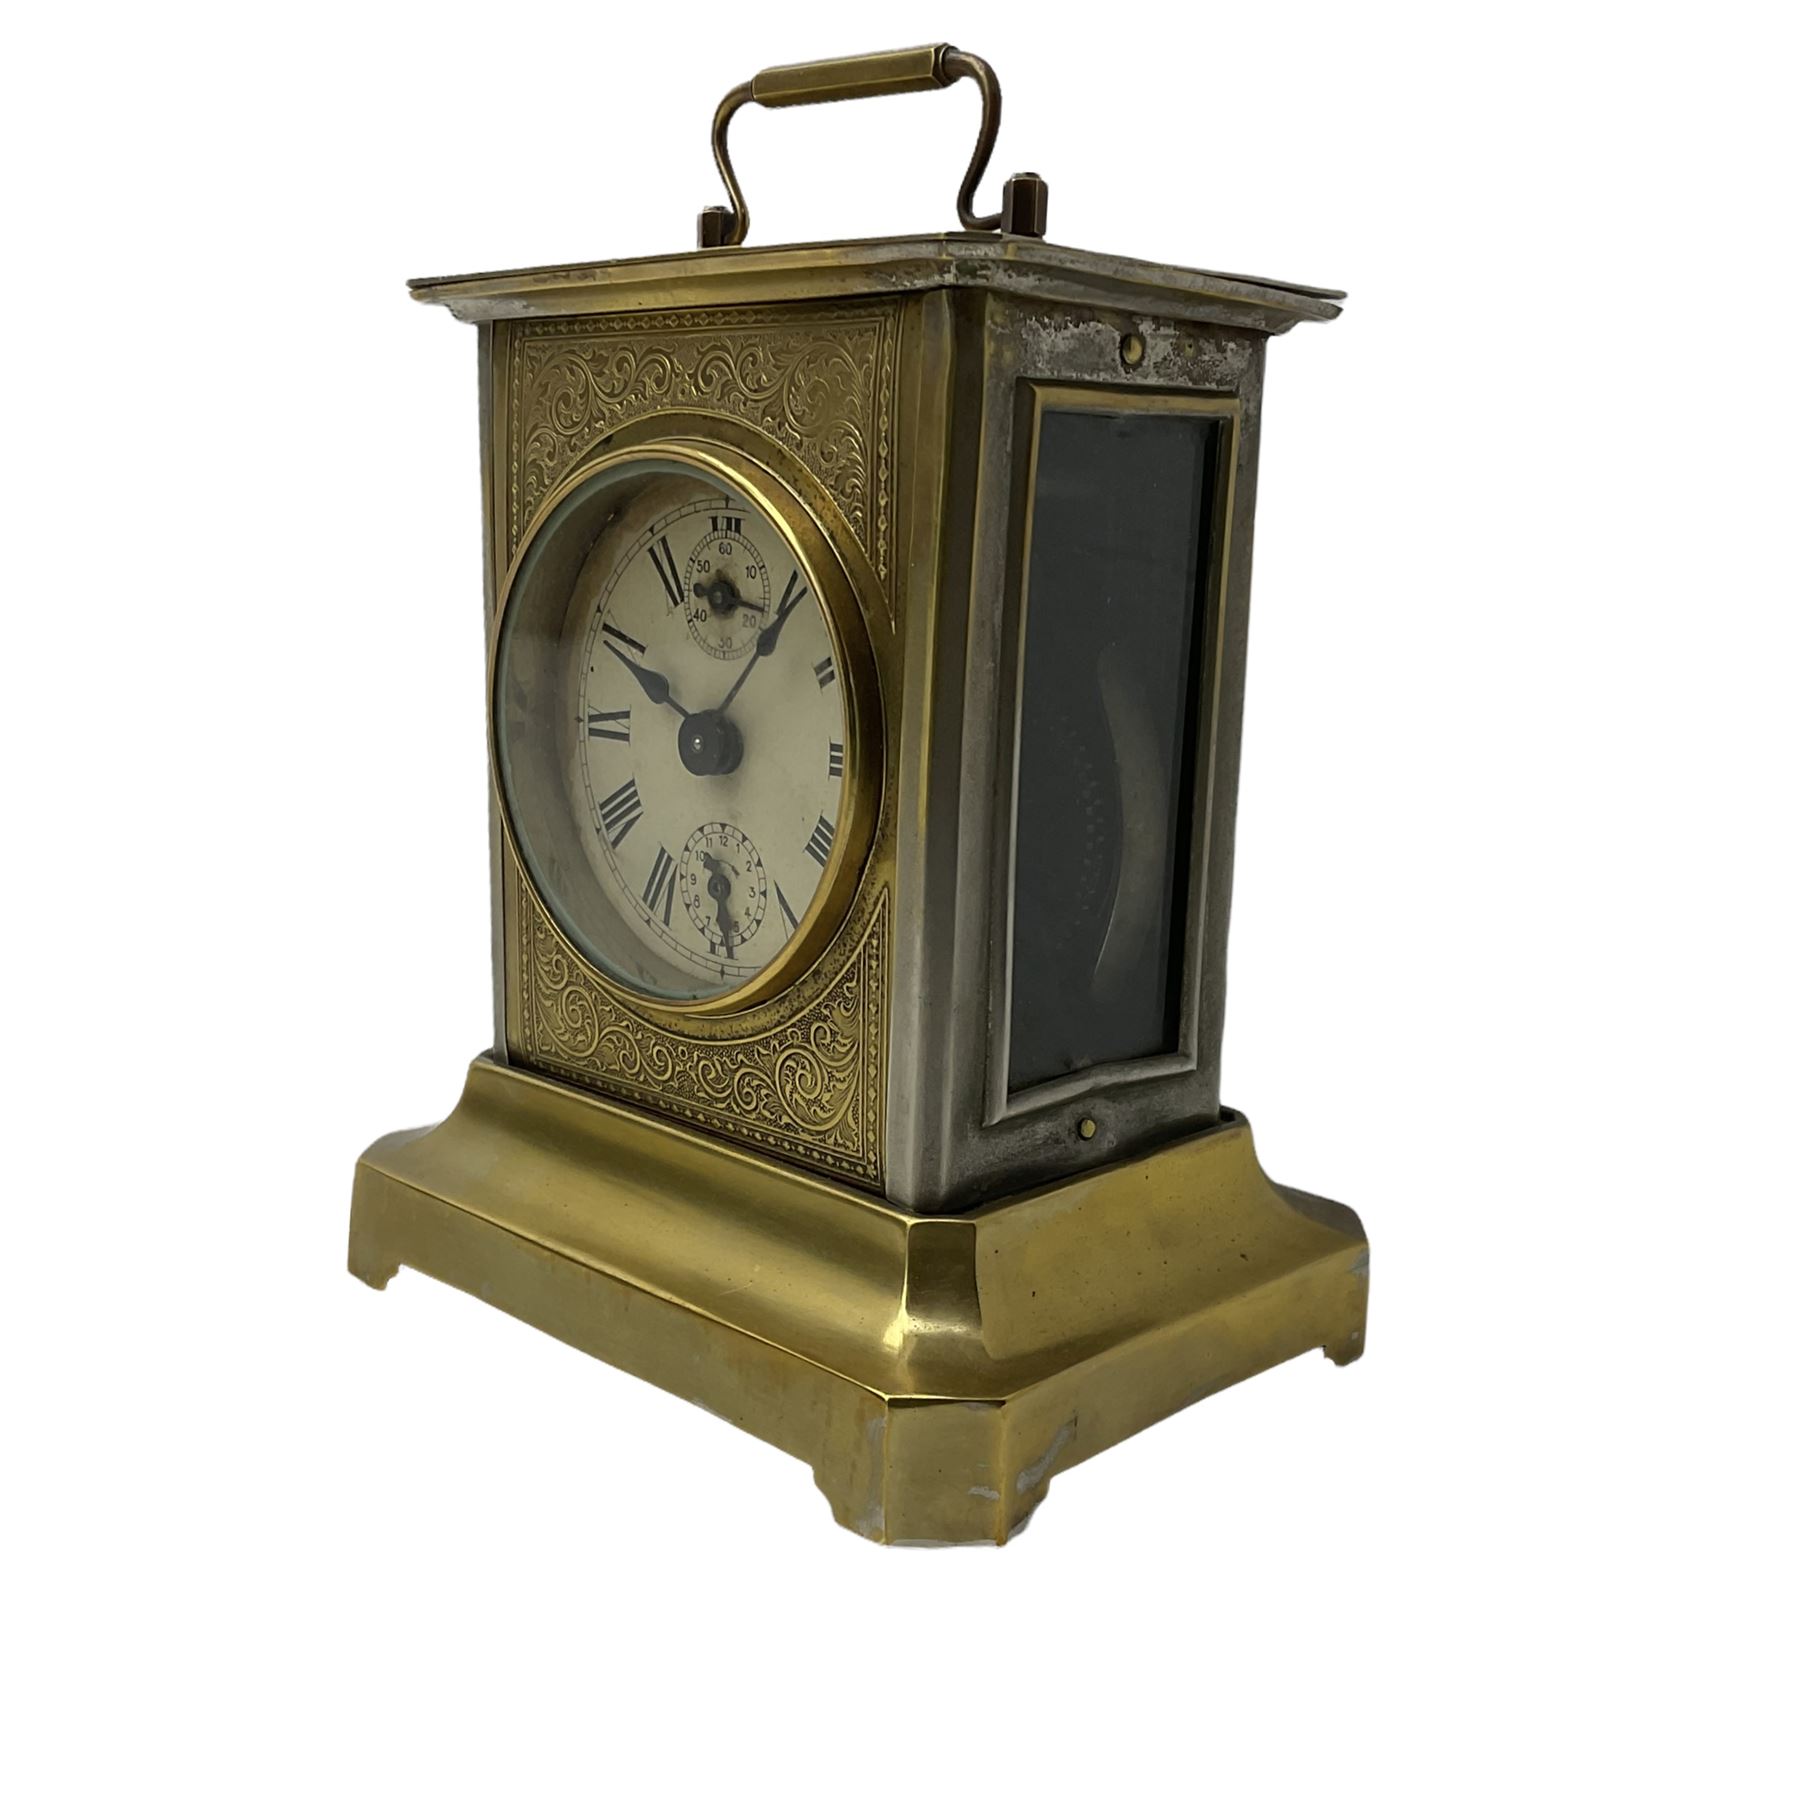 A German Juhngans �Joker� carriage clock with a musical alarm c1890 - Image 2 of 3